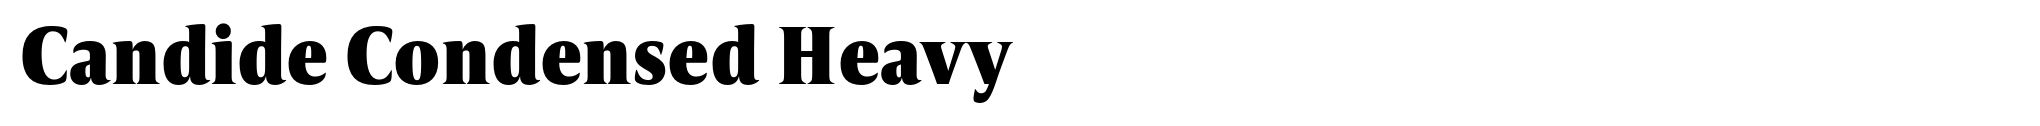 Candide Condensed Heavy image